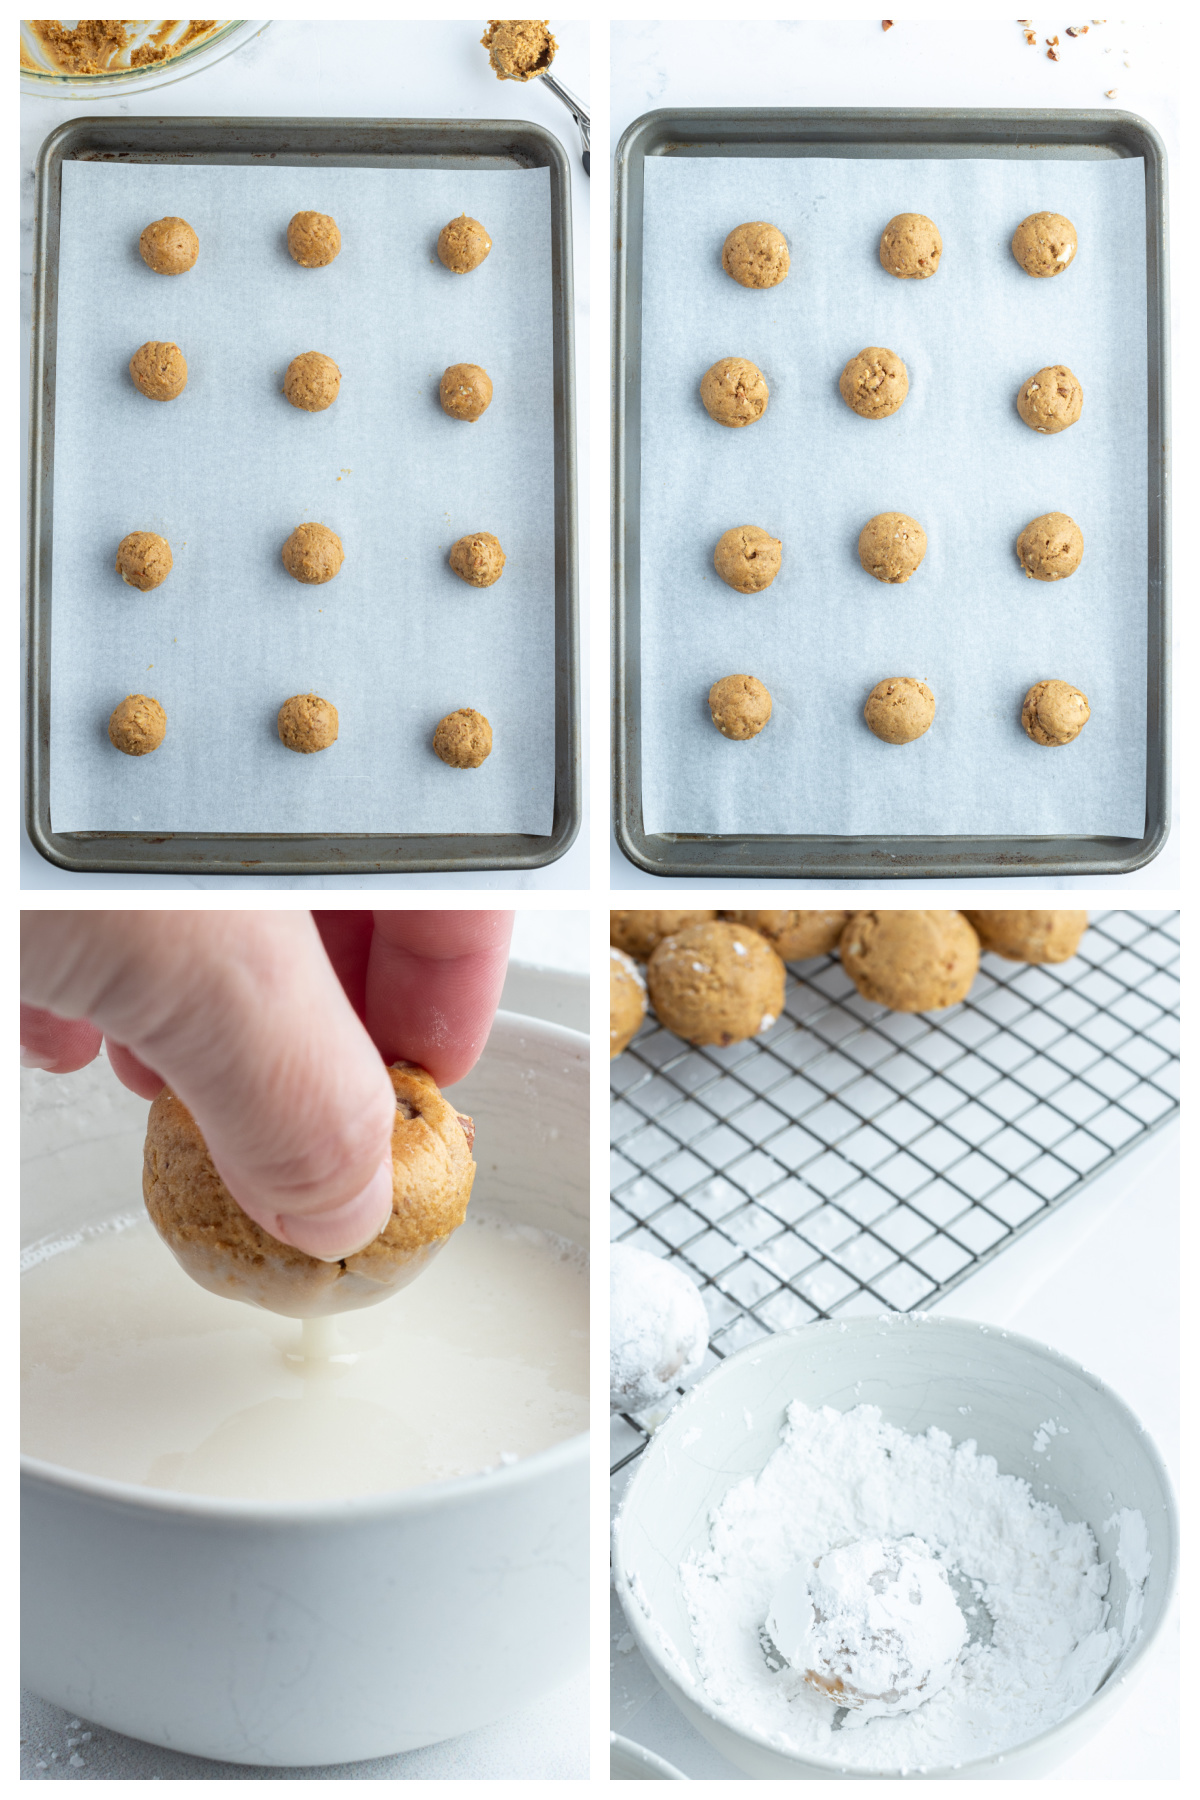 four photos showing how to make pfeffernusse cookies